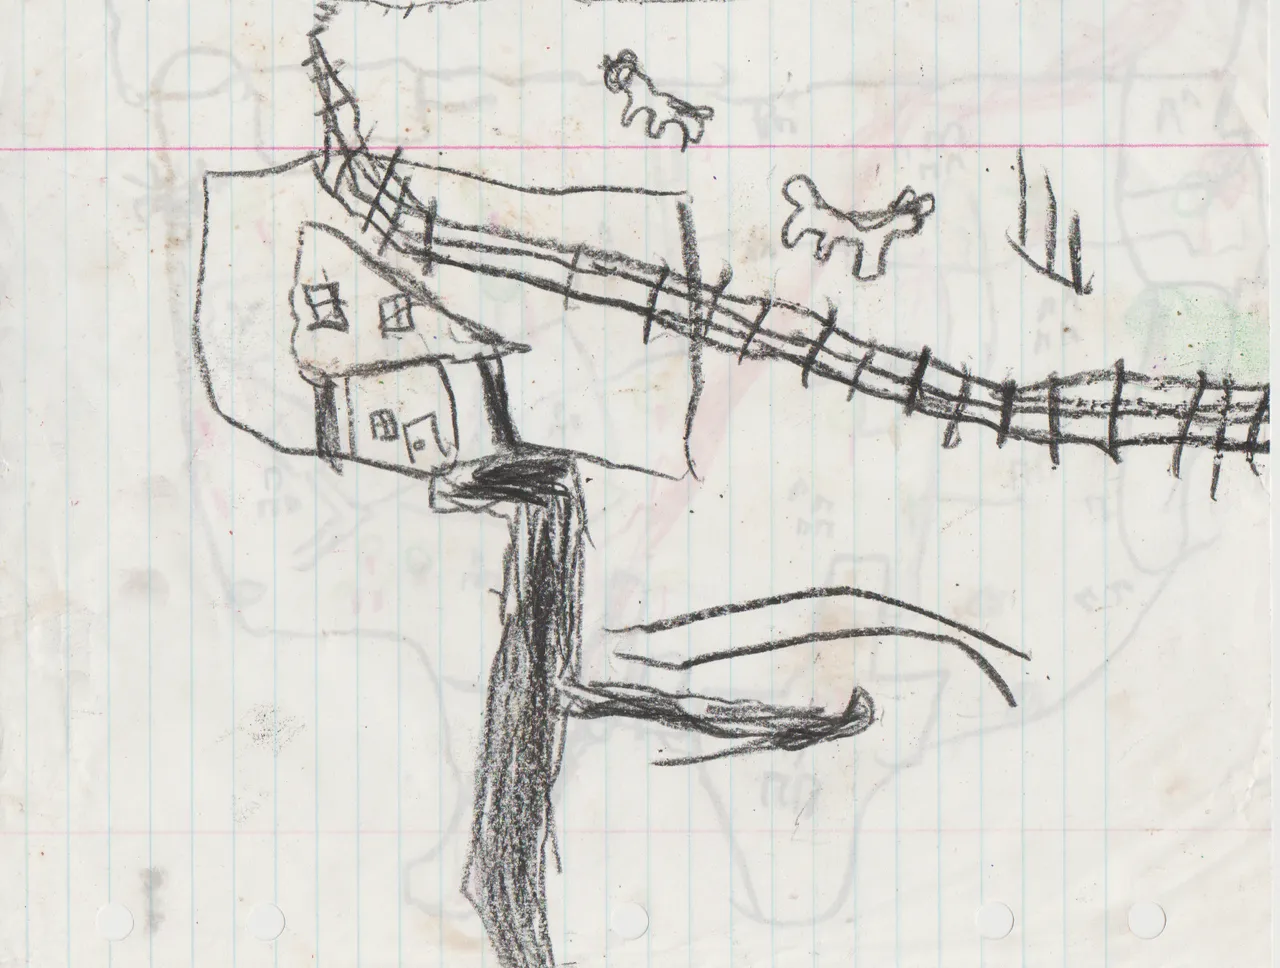 1993 maybe - USA map and house, fence, road, horses or other animals, maybe a tree house-2.png